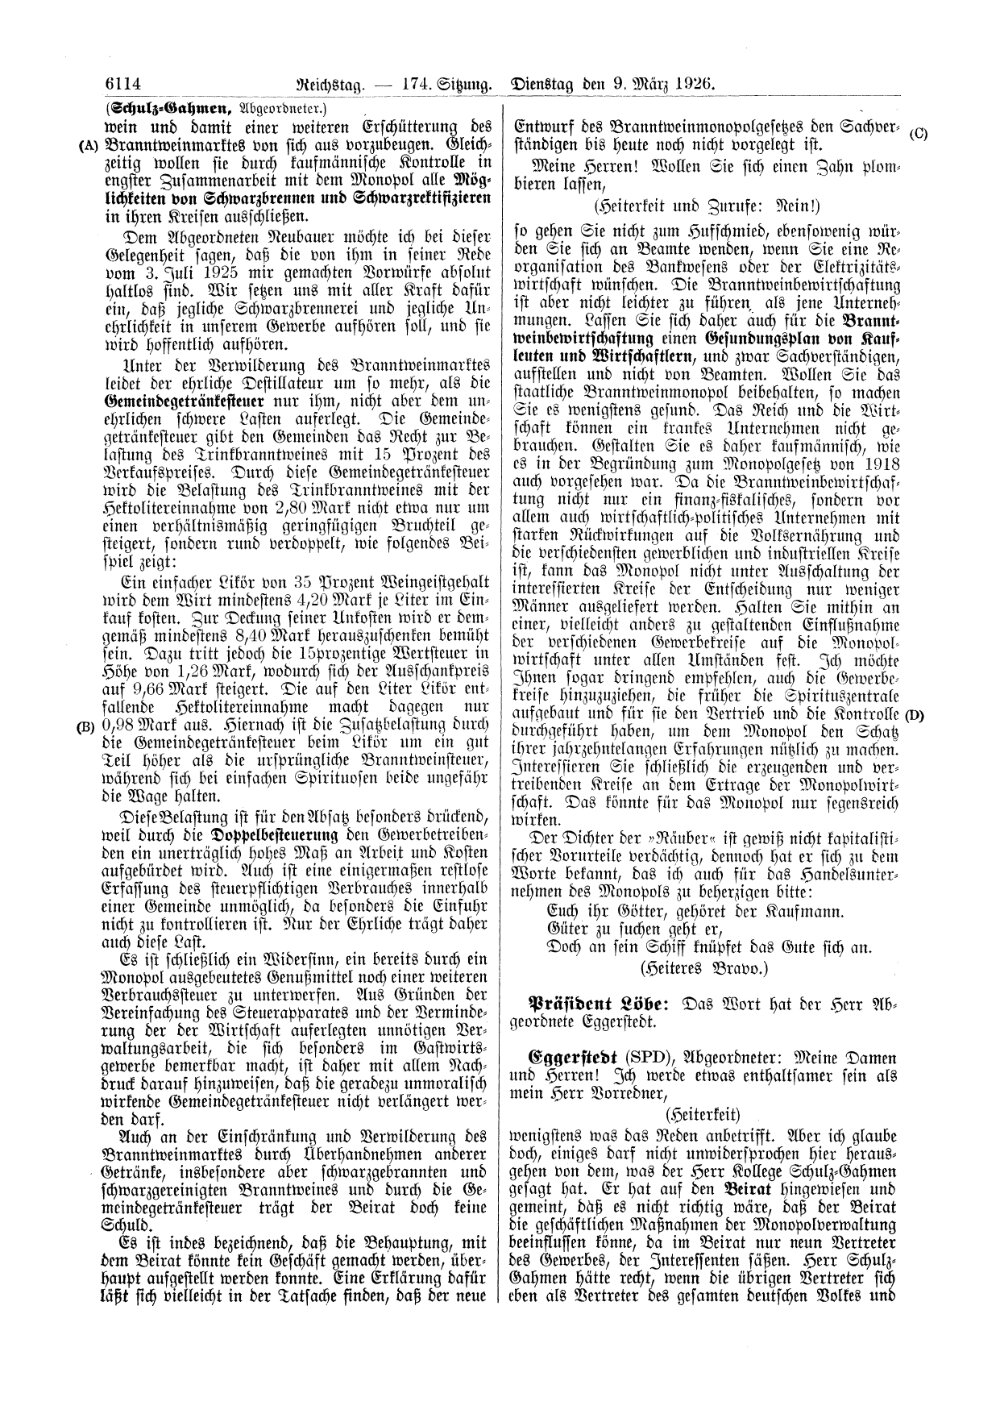 Scan of page 6114